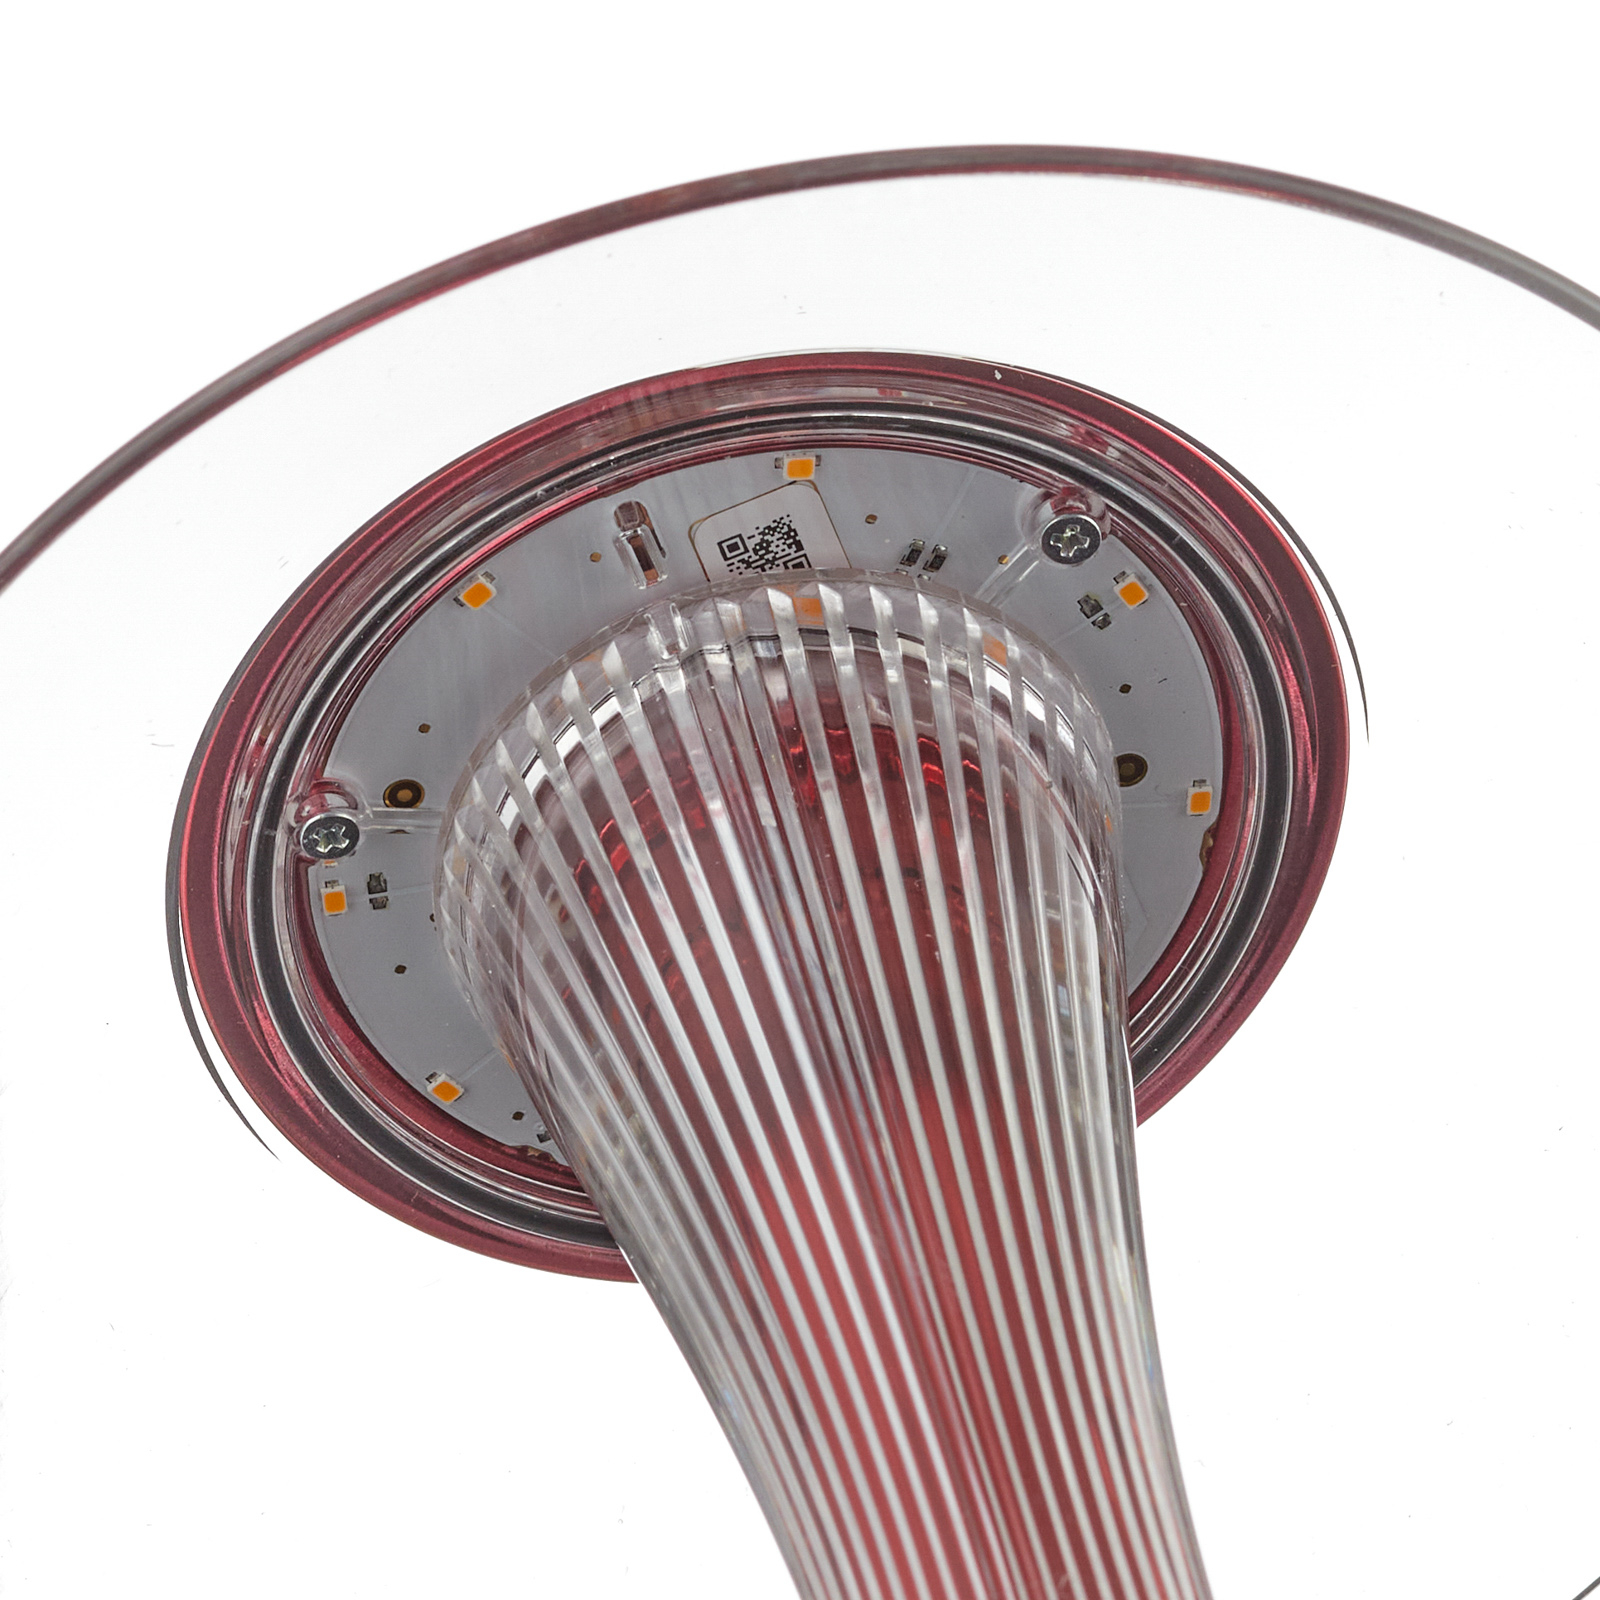 Kartell Space lampe LED rouge Limited Edition